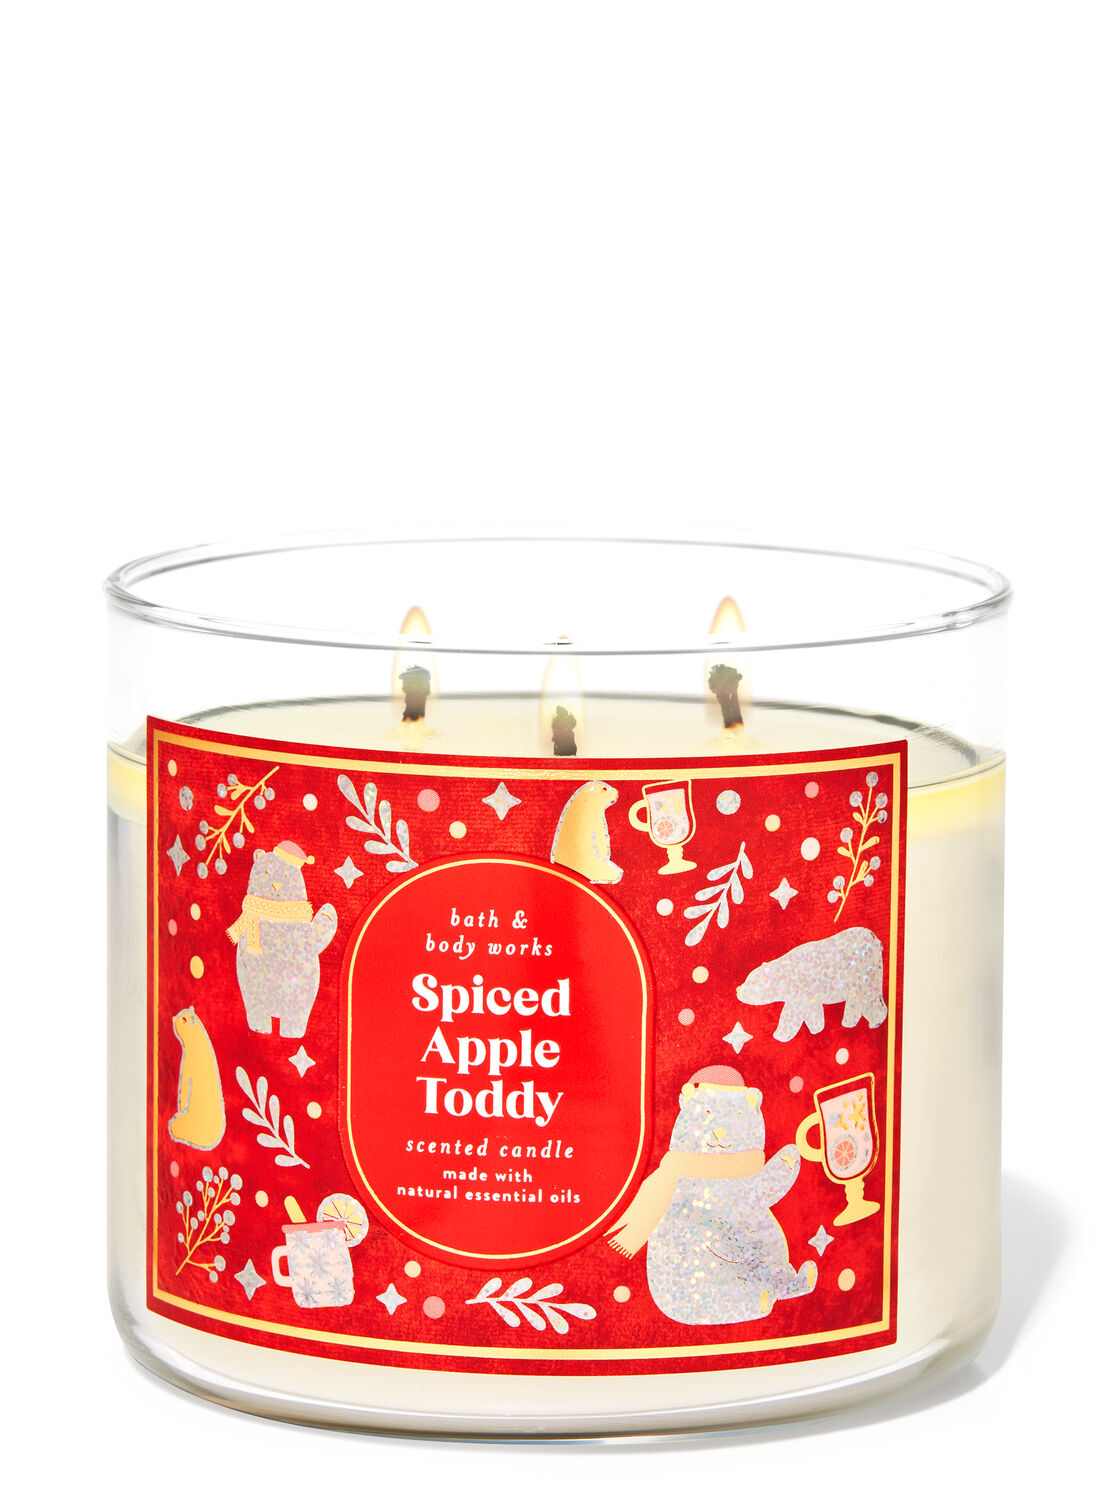 LARGE 14.5 Oz Bath & Body Works SPICED APPLE TODDY 3 Wick Candle 